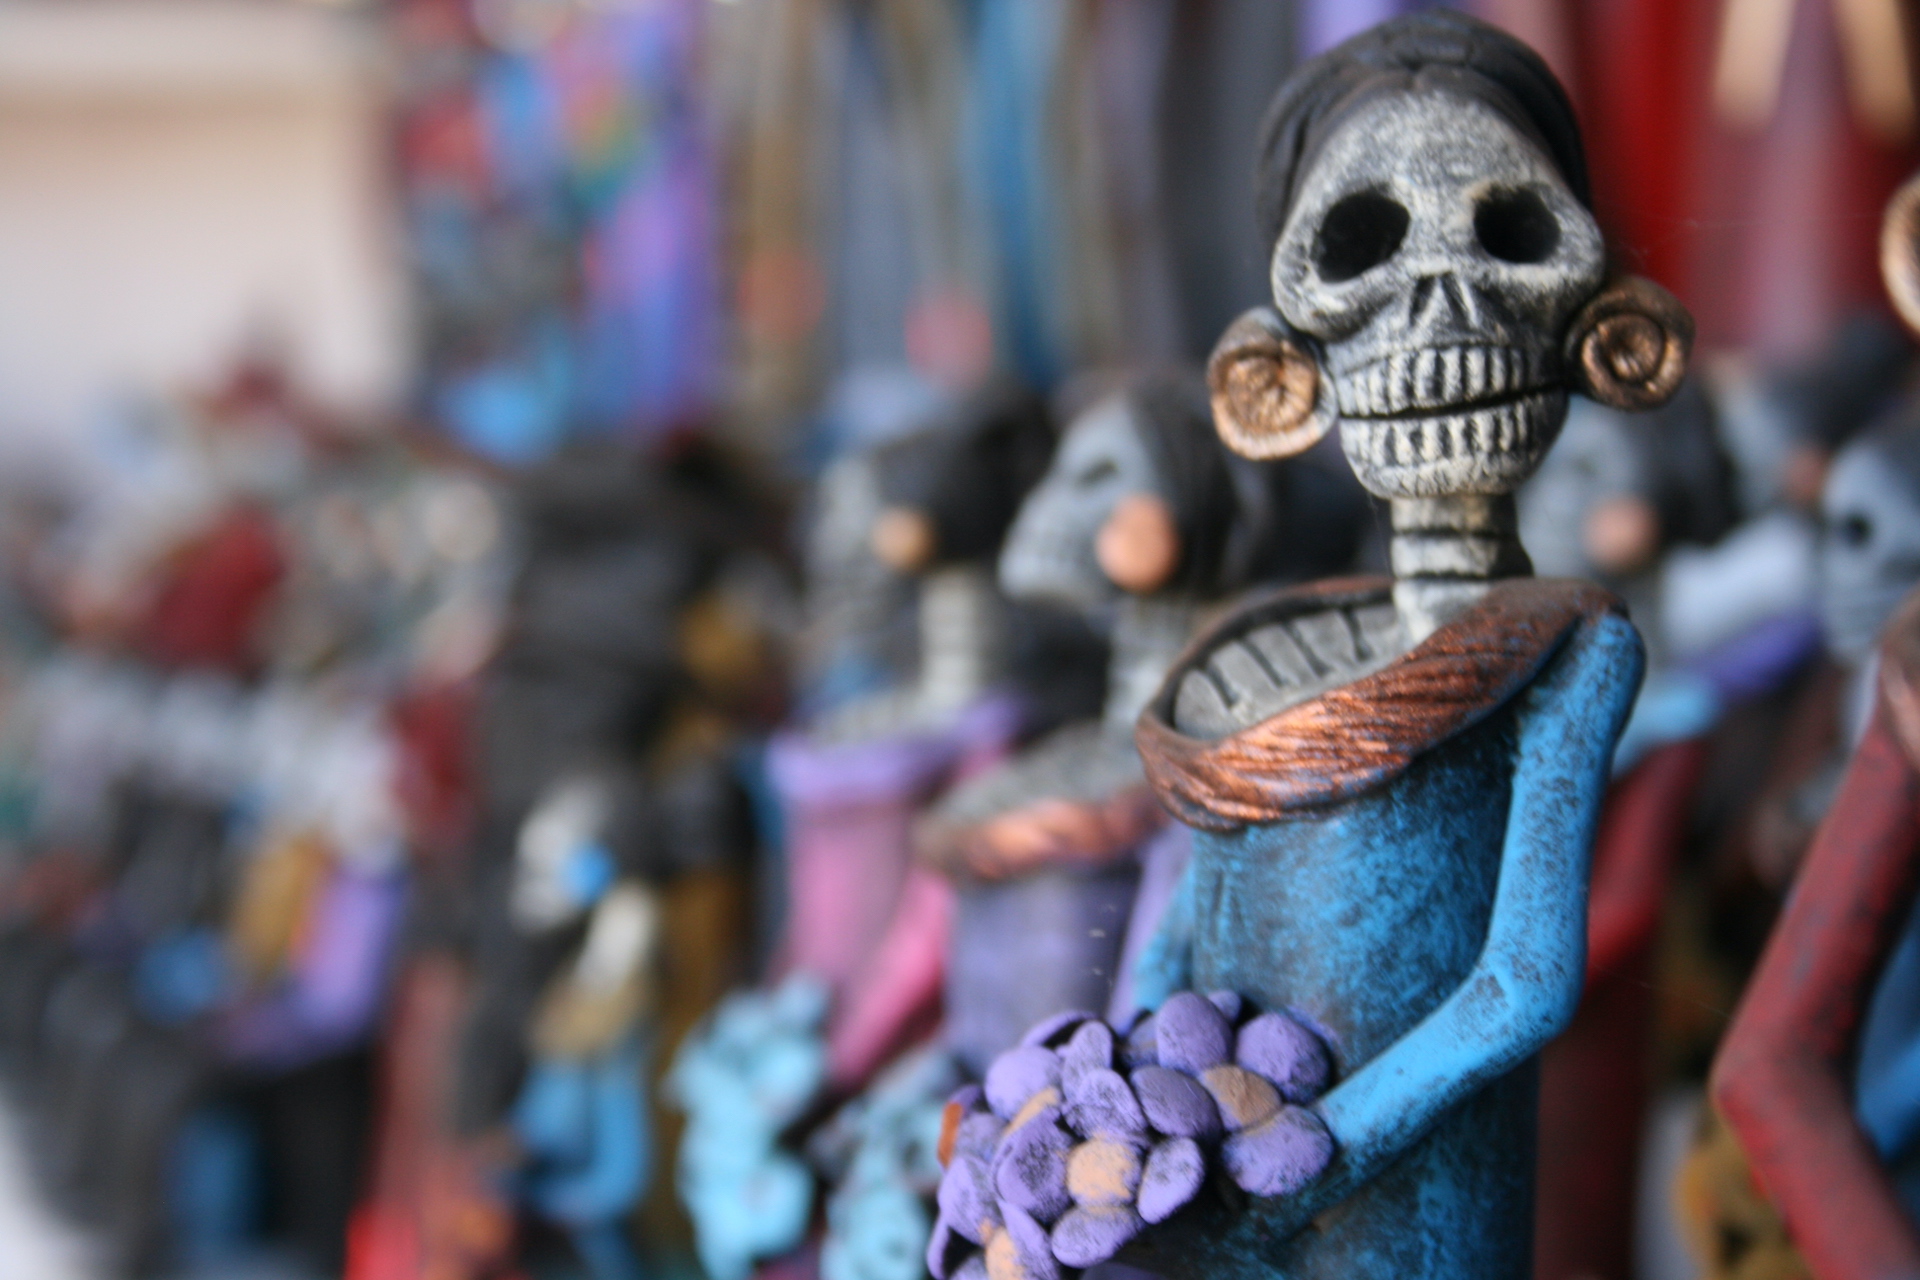 A calavera – Day of the Dead skeleton – all dressed up for that afterlife party.